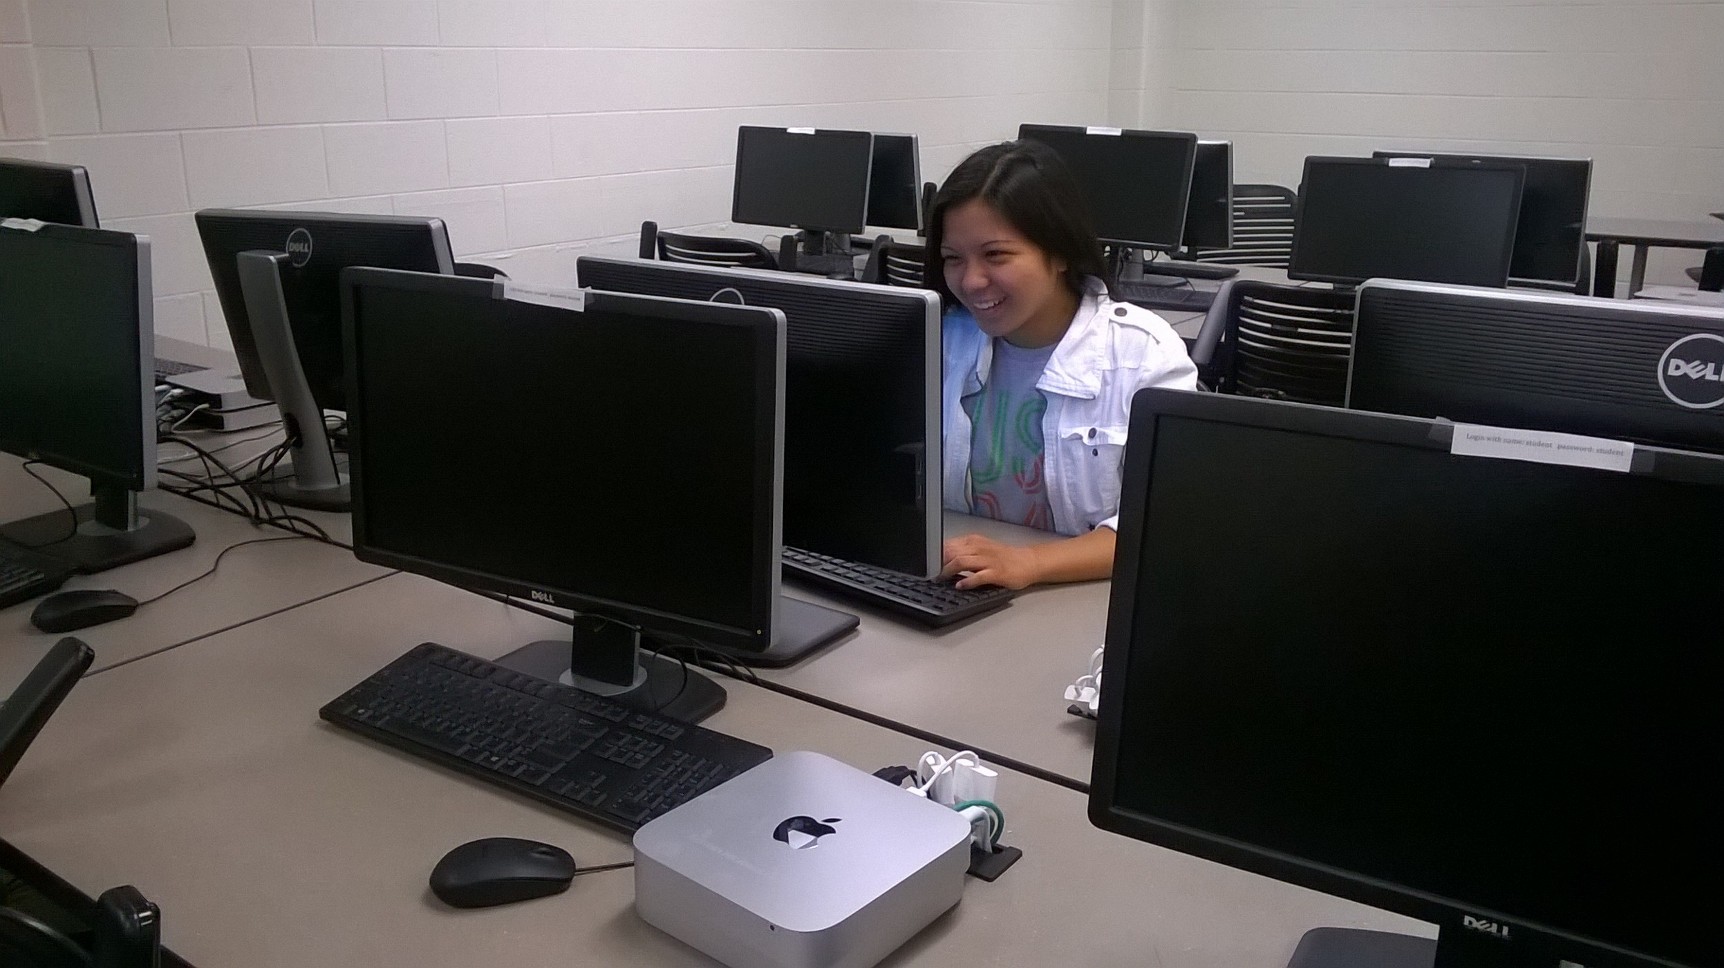 A student works on a computer in the Economics Computer Lab.